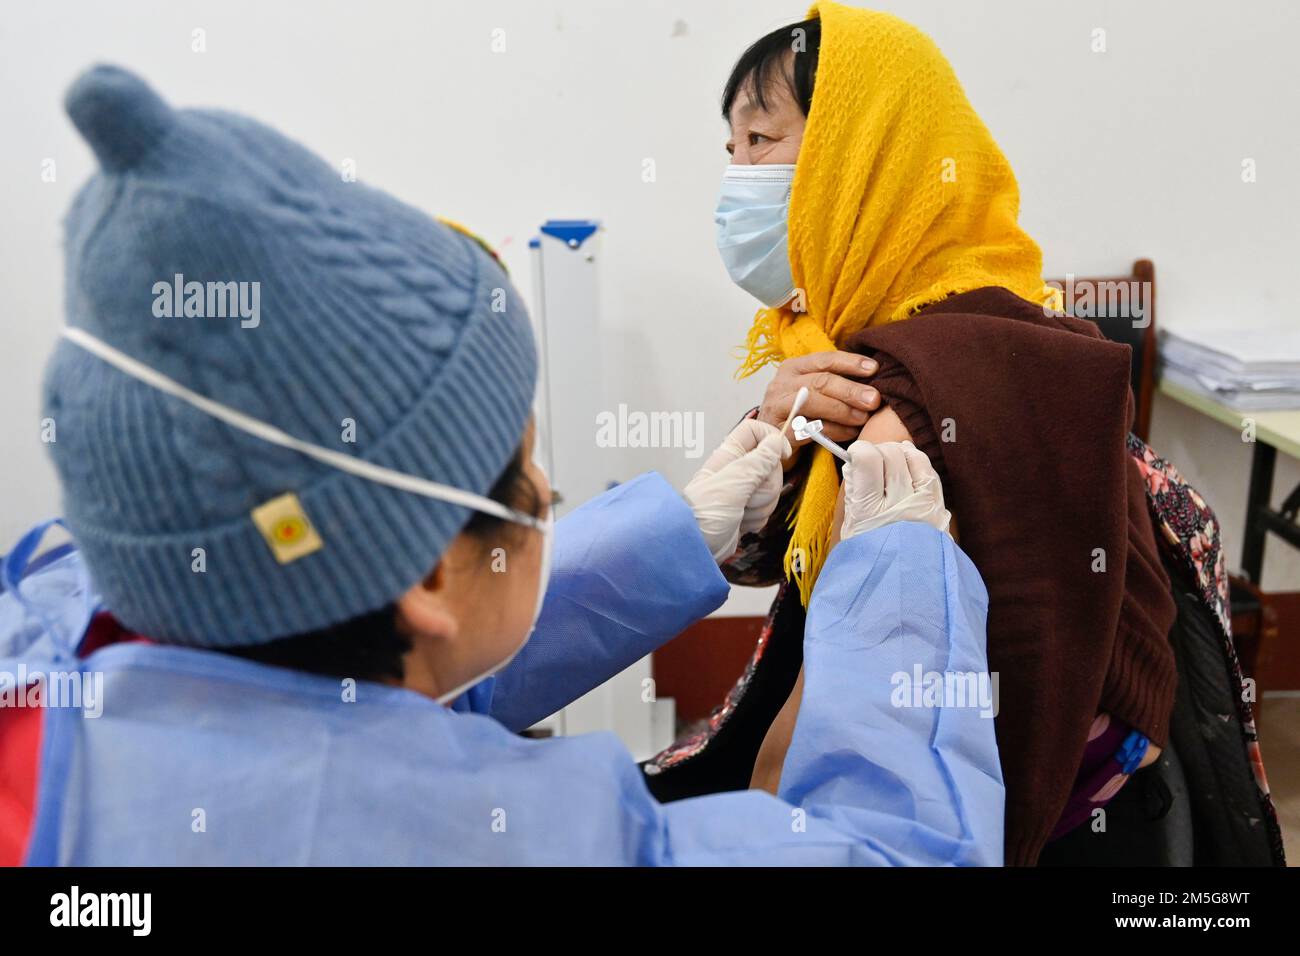 WEIFANG, CHINA - DECEMBER 29, 2022 - A medical worker inoculates a citizen with a second dose of booster vaccine at a centralized COVID-19 vaccination Stock Photo